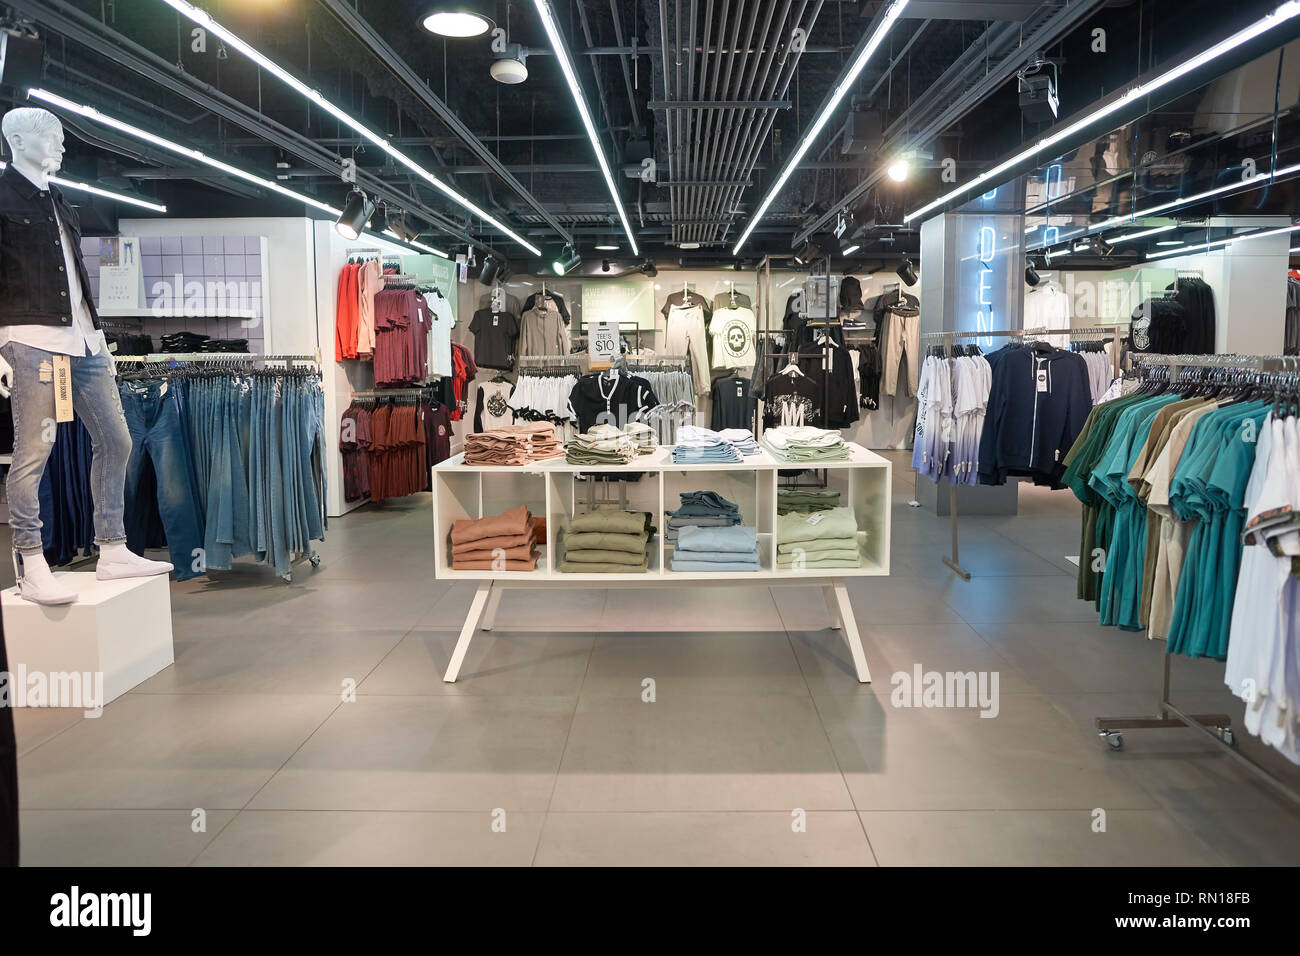 Topshop Store Interior High Resolution Stock Photography and Images - Alamy